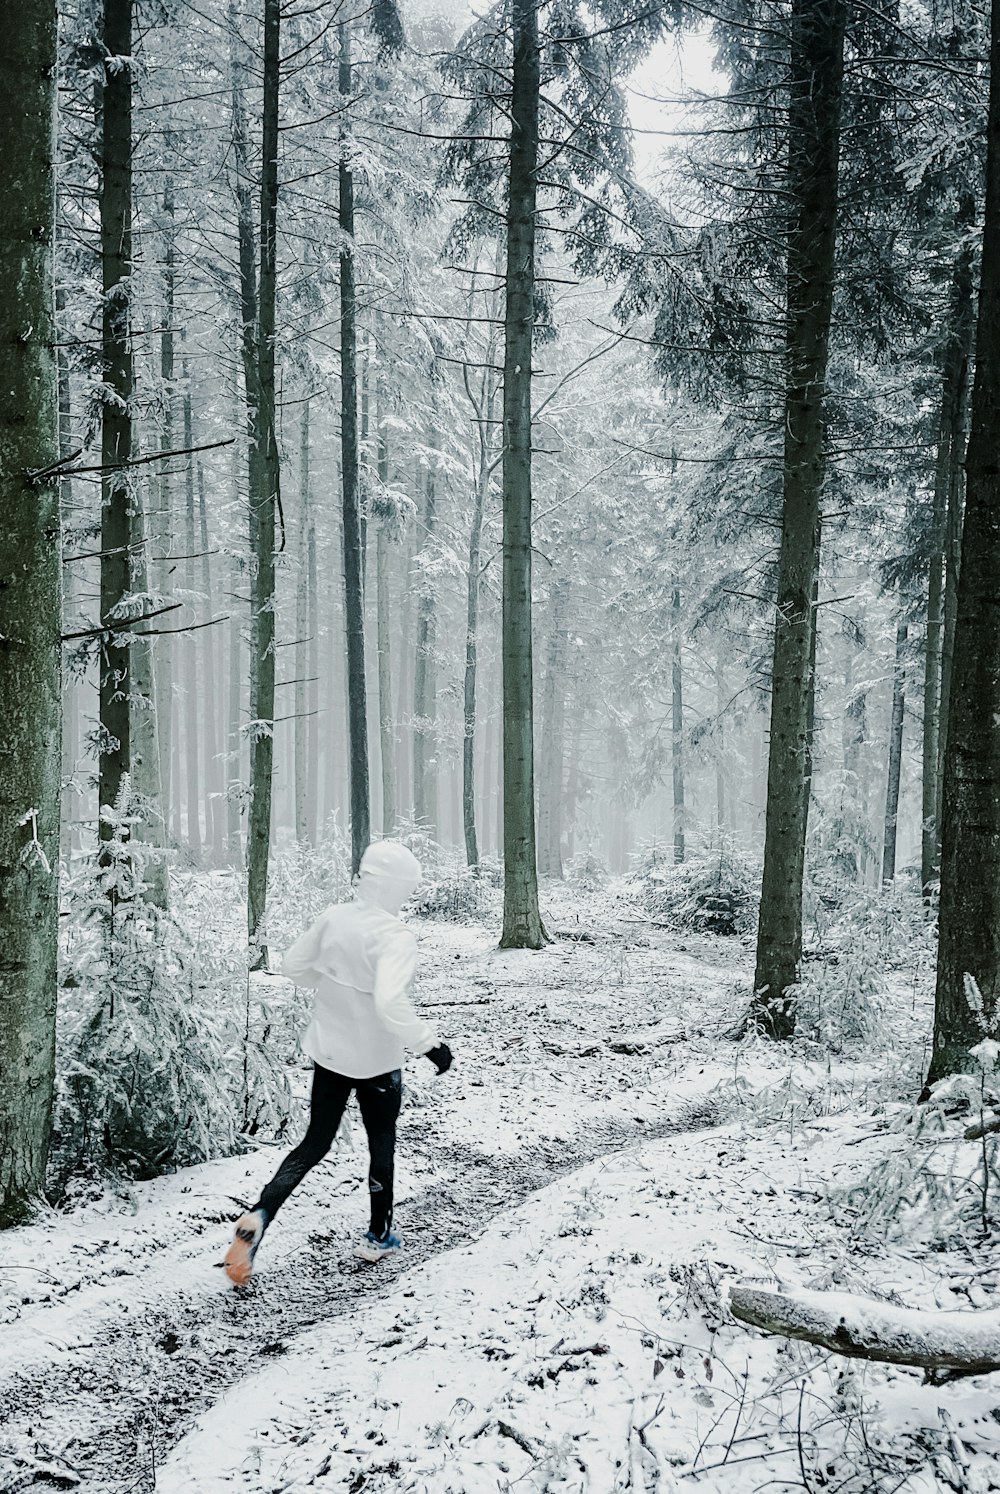 a person walking in the snow through a forest